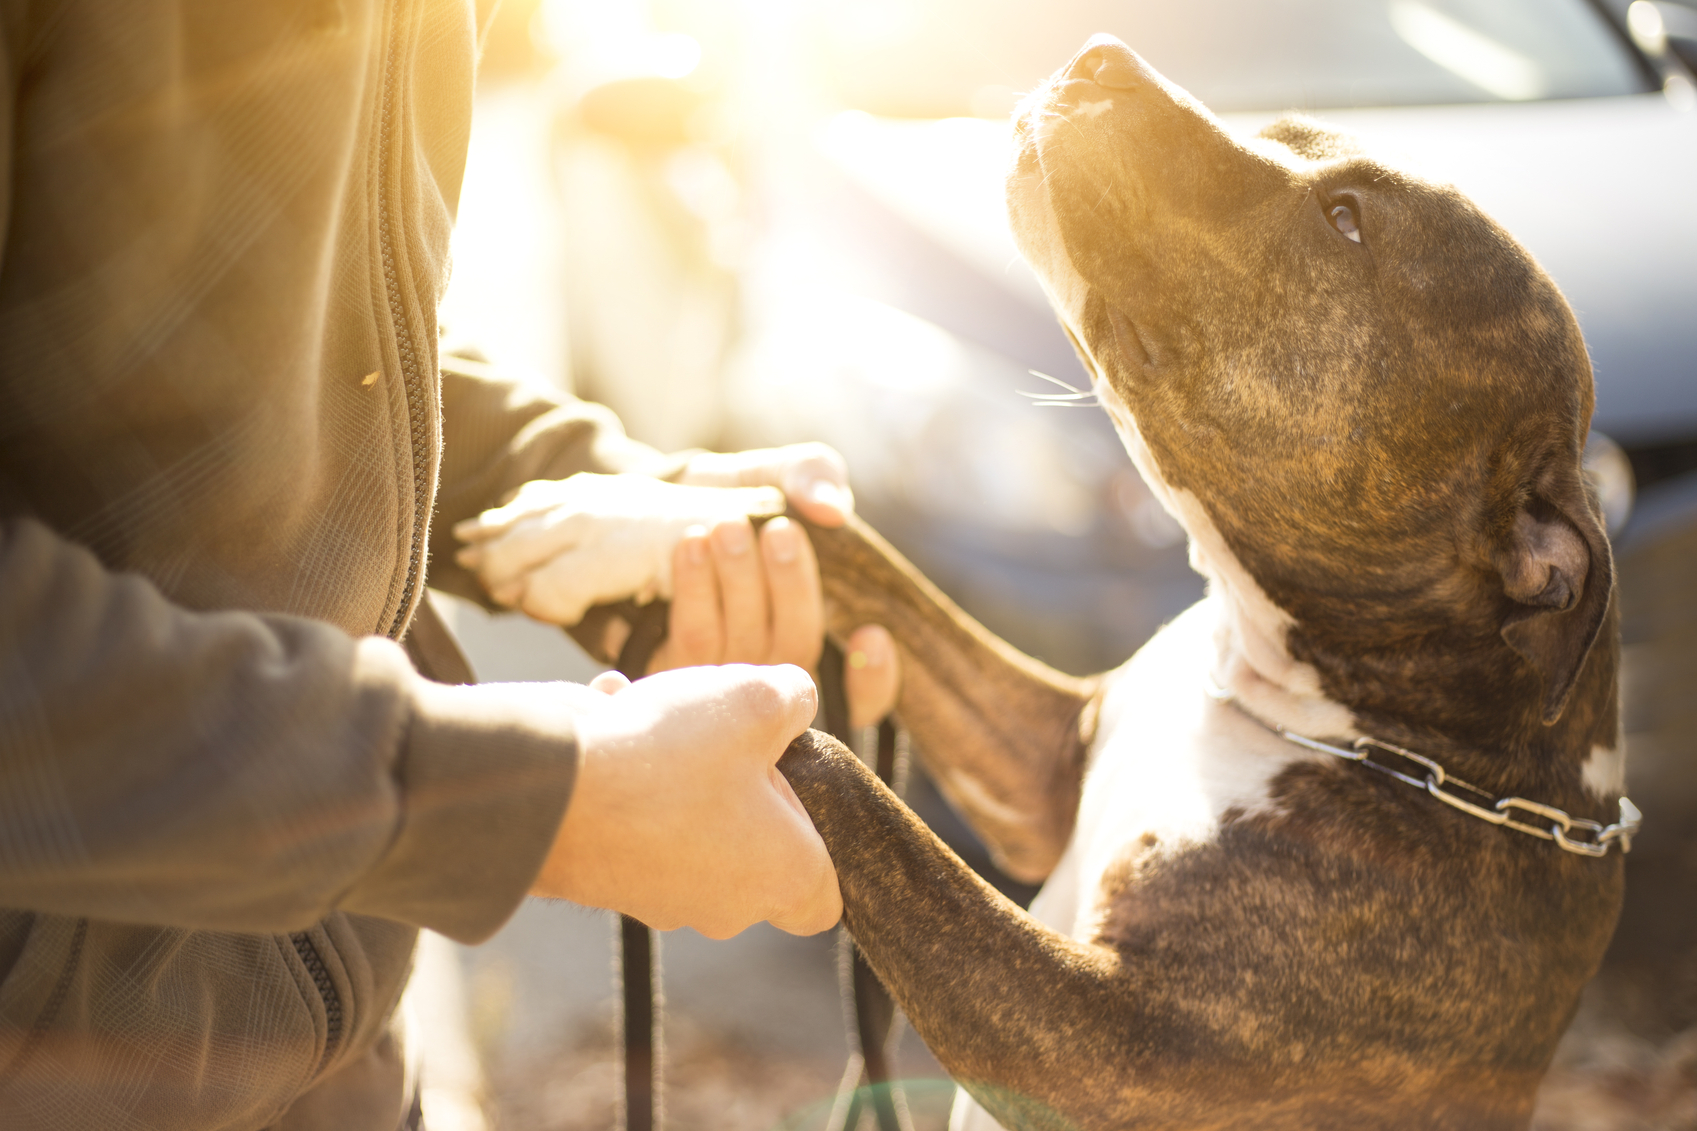 Suffering from a dog bite injury? Speak with an experienced Everett dog bite lawyer from Wells Trumbull for legal guidance and support today.